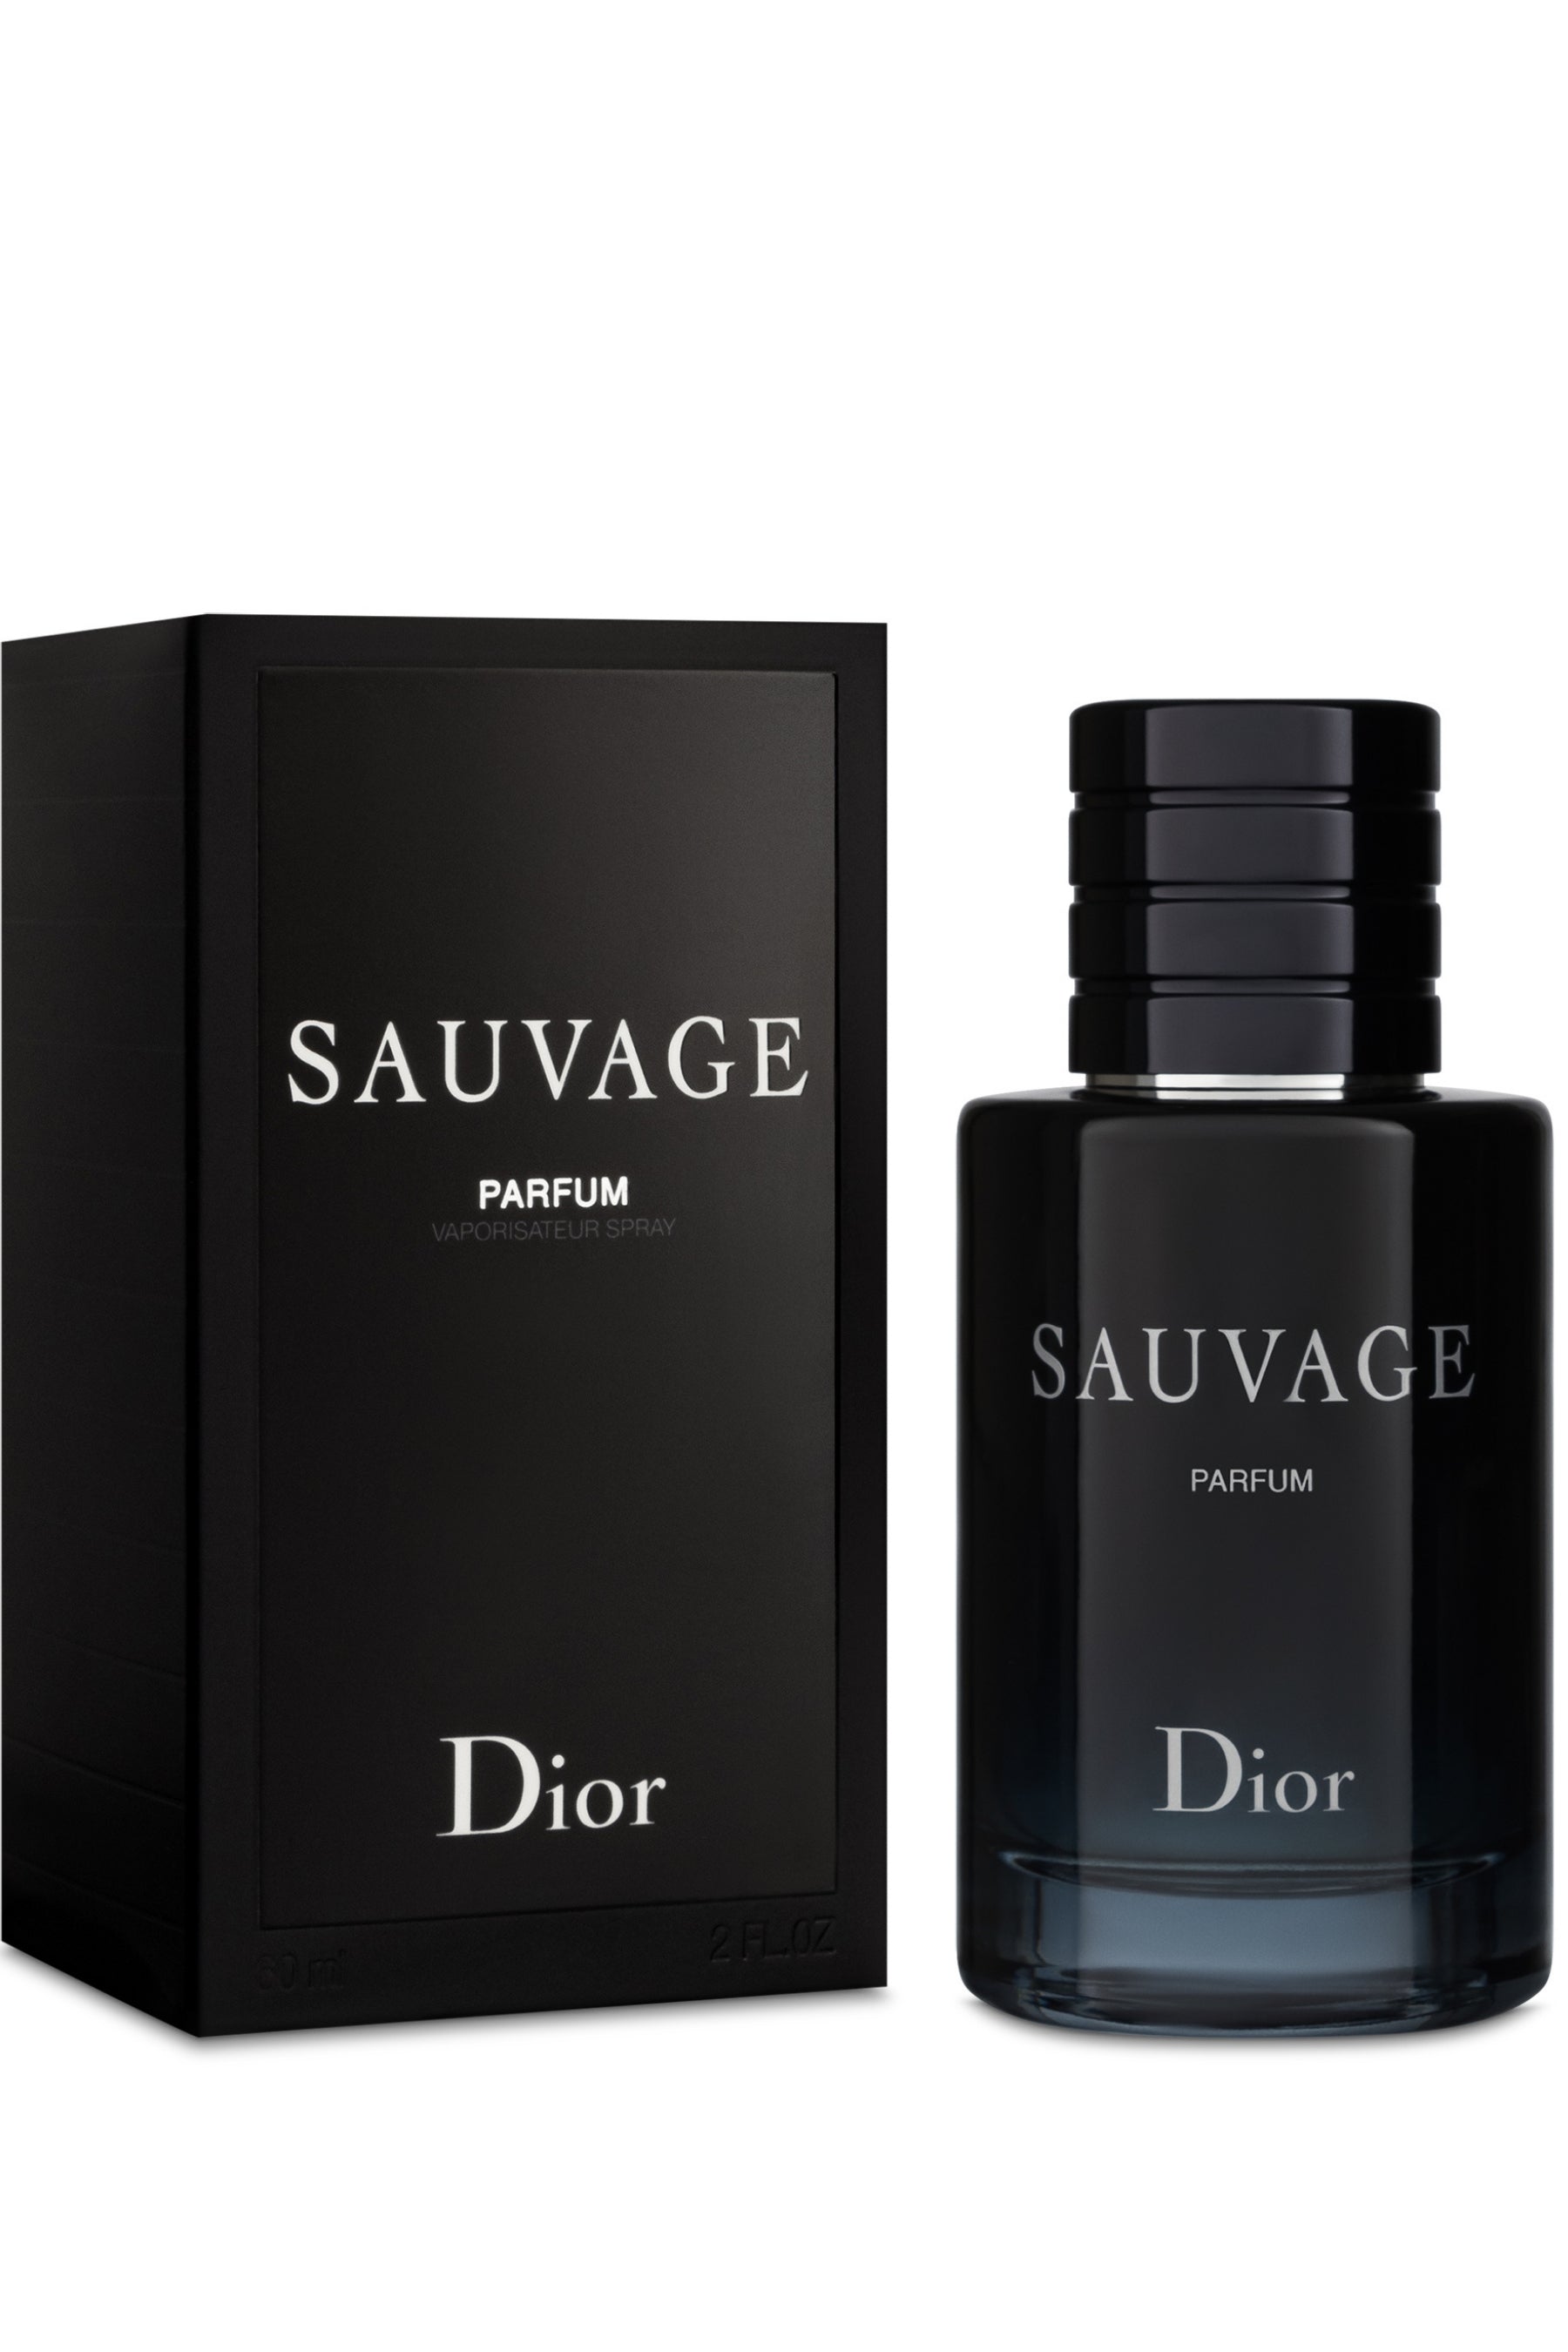 How Good is Dior Sauvage in 2021 